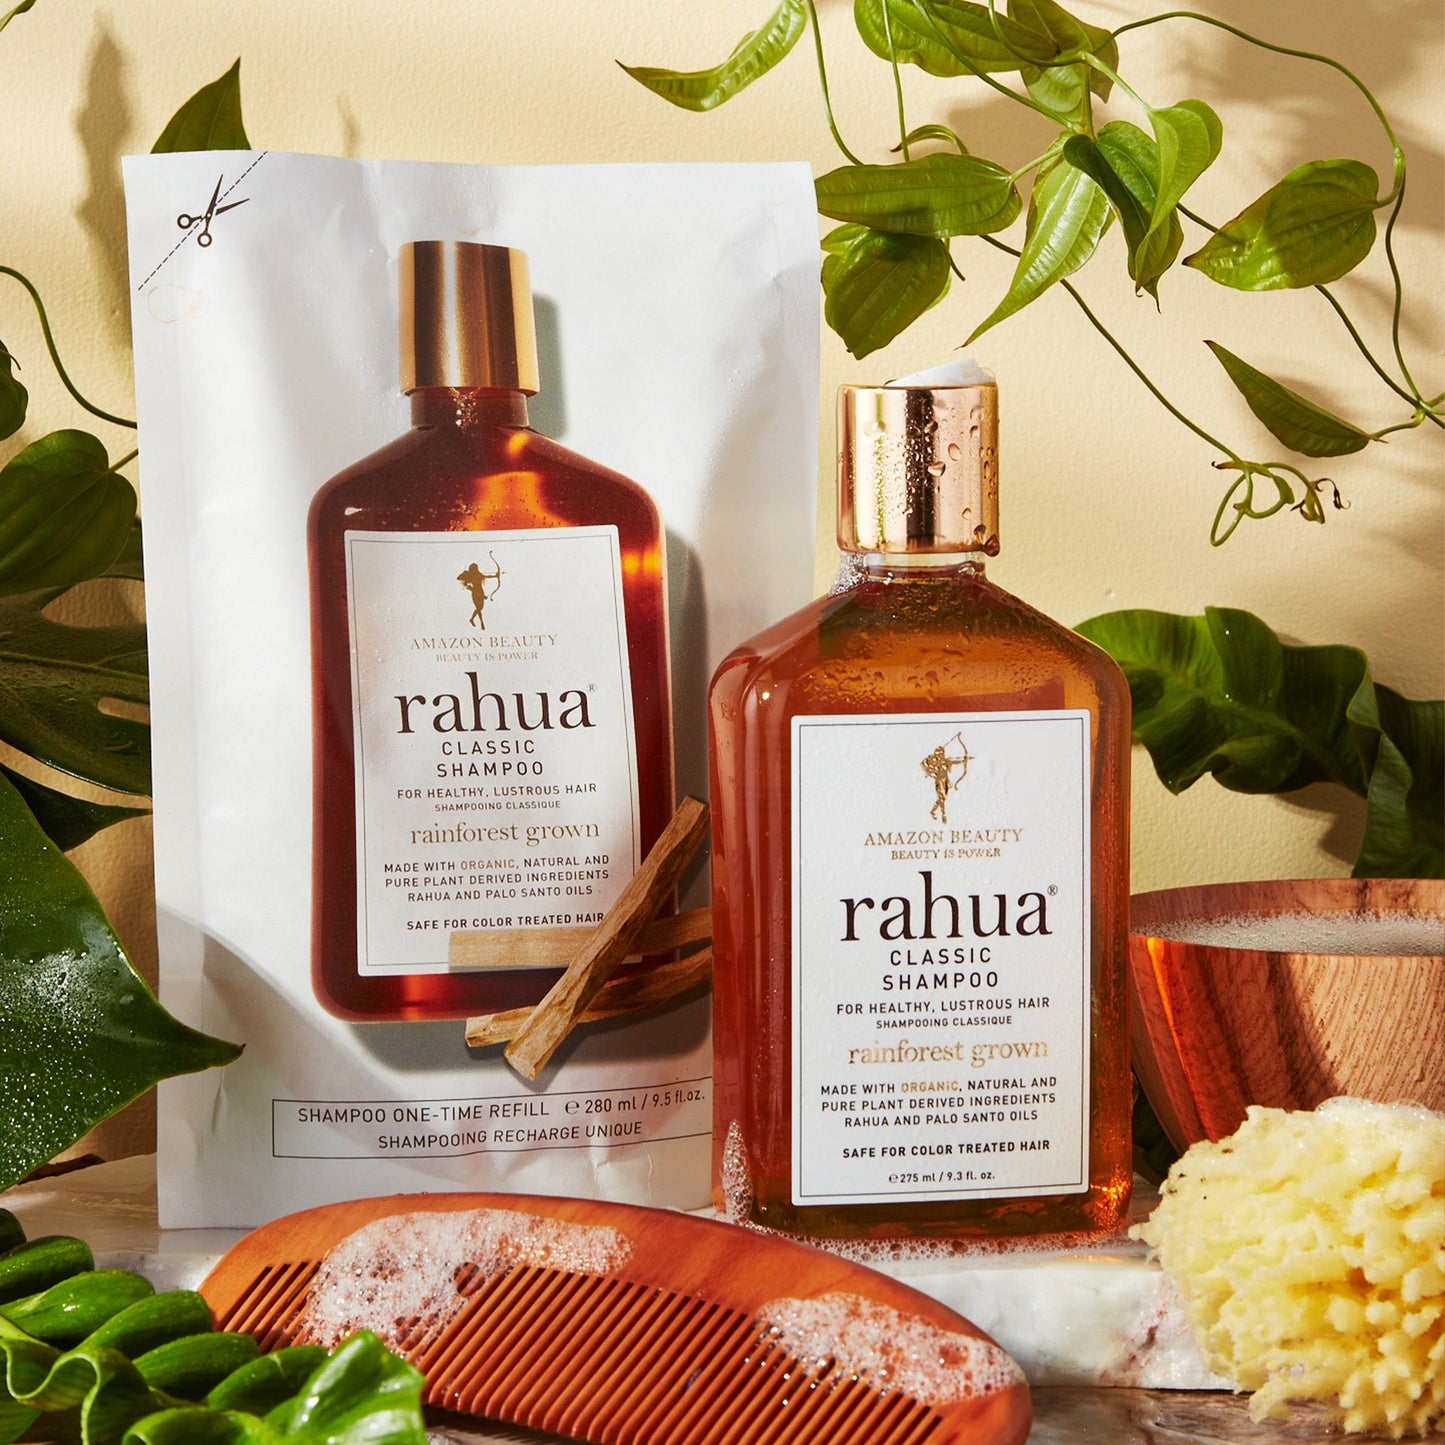 rahua classic shampoo refill and bottle with a bowl full of shampoo foam and foam spread over comb and floor